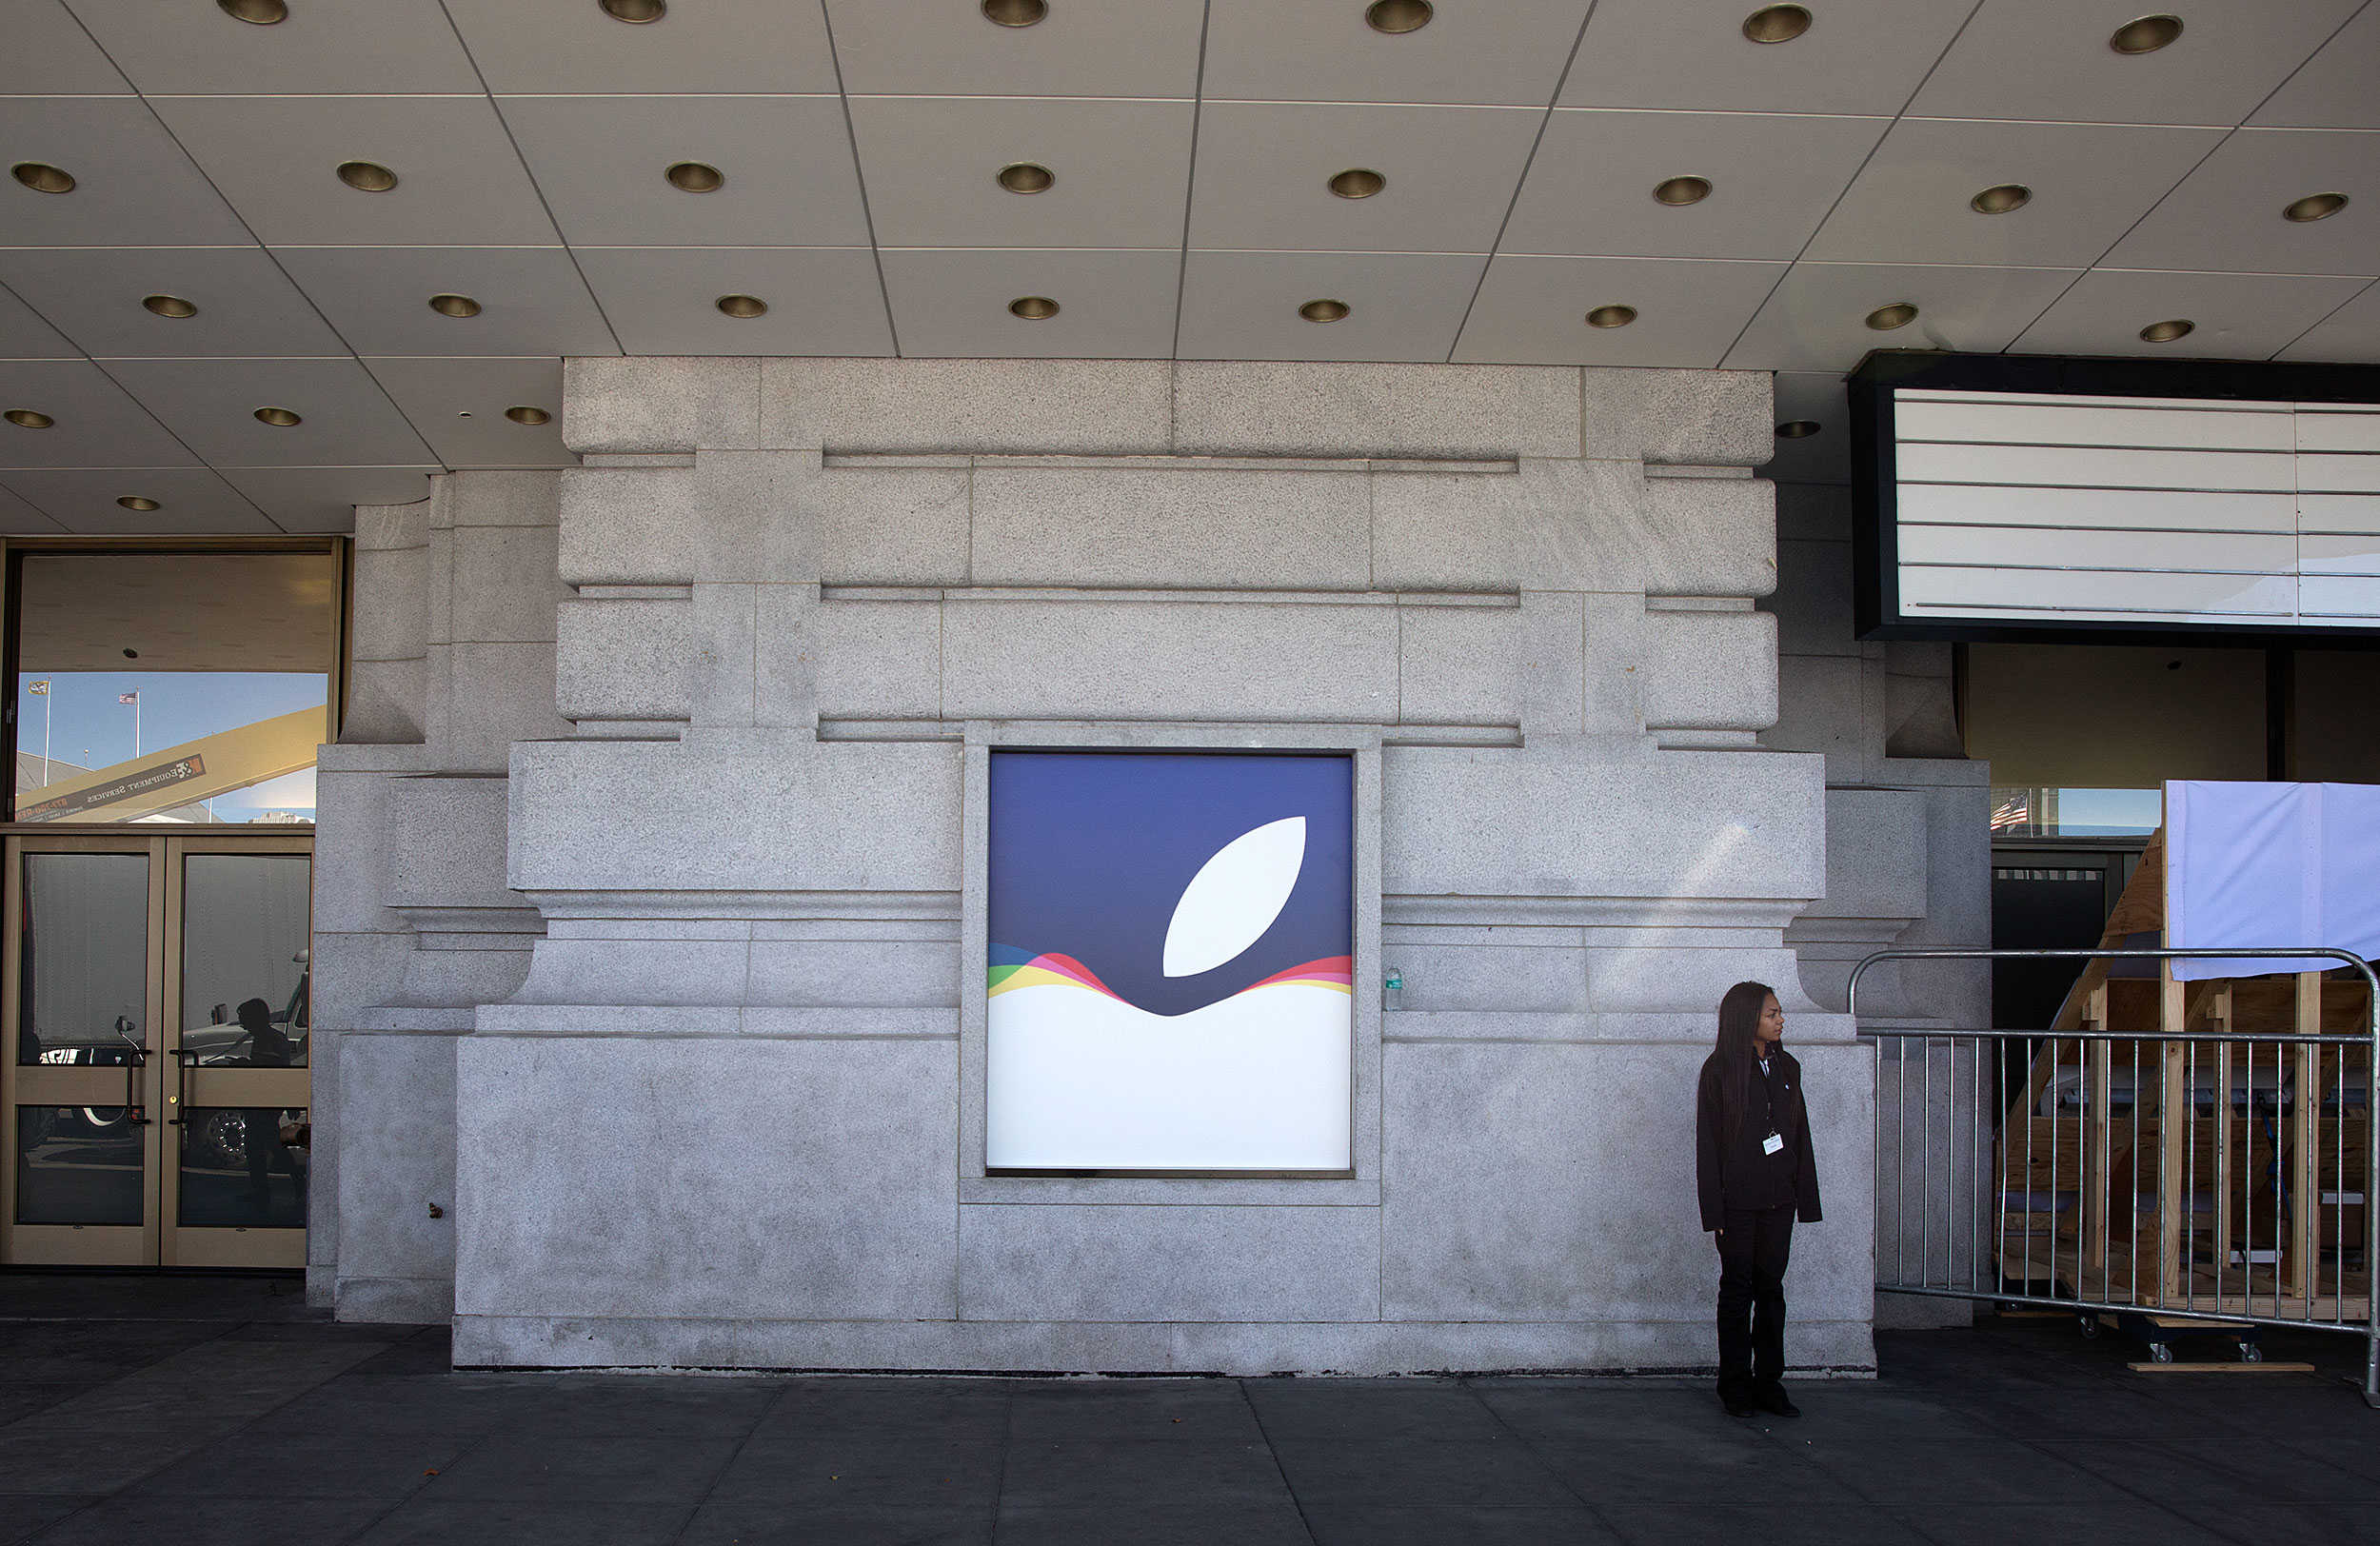 Apple is making its mark on San Francisco.